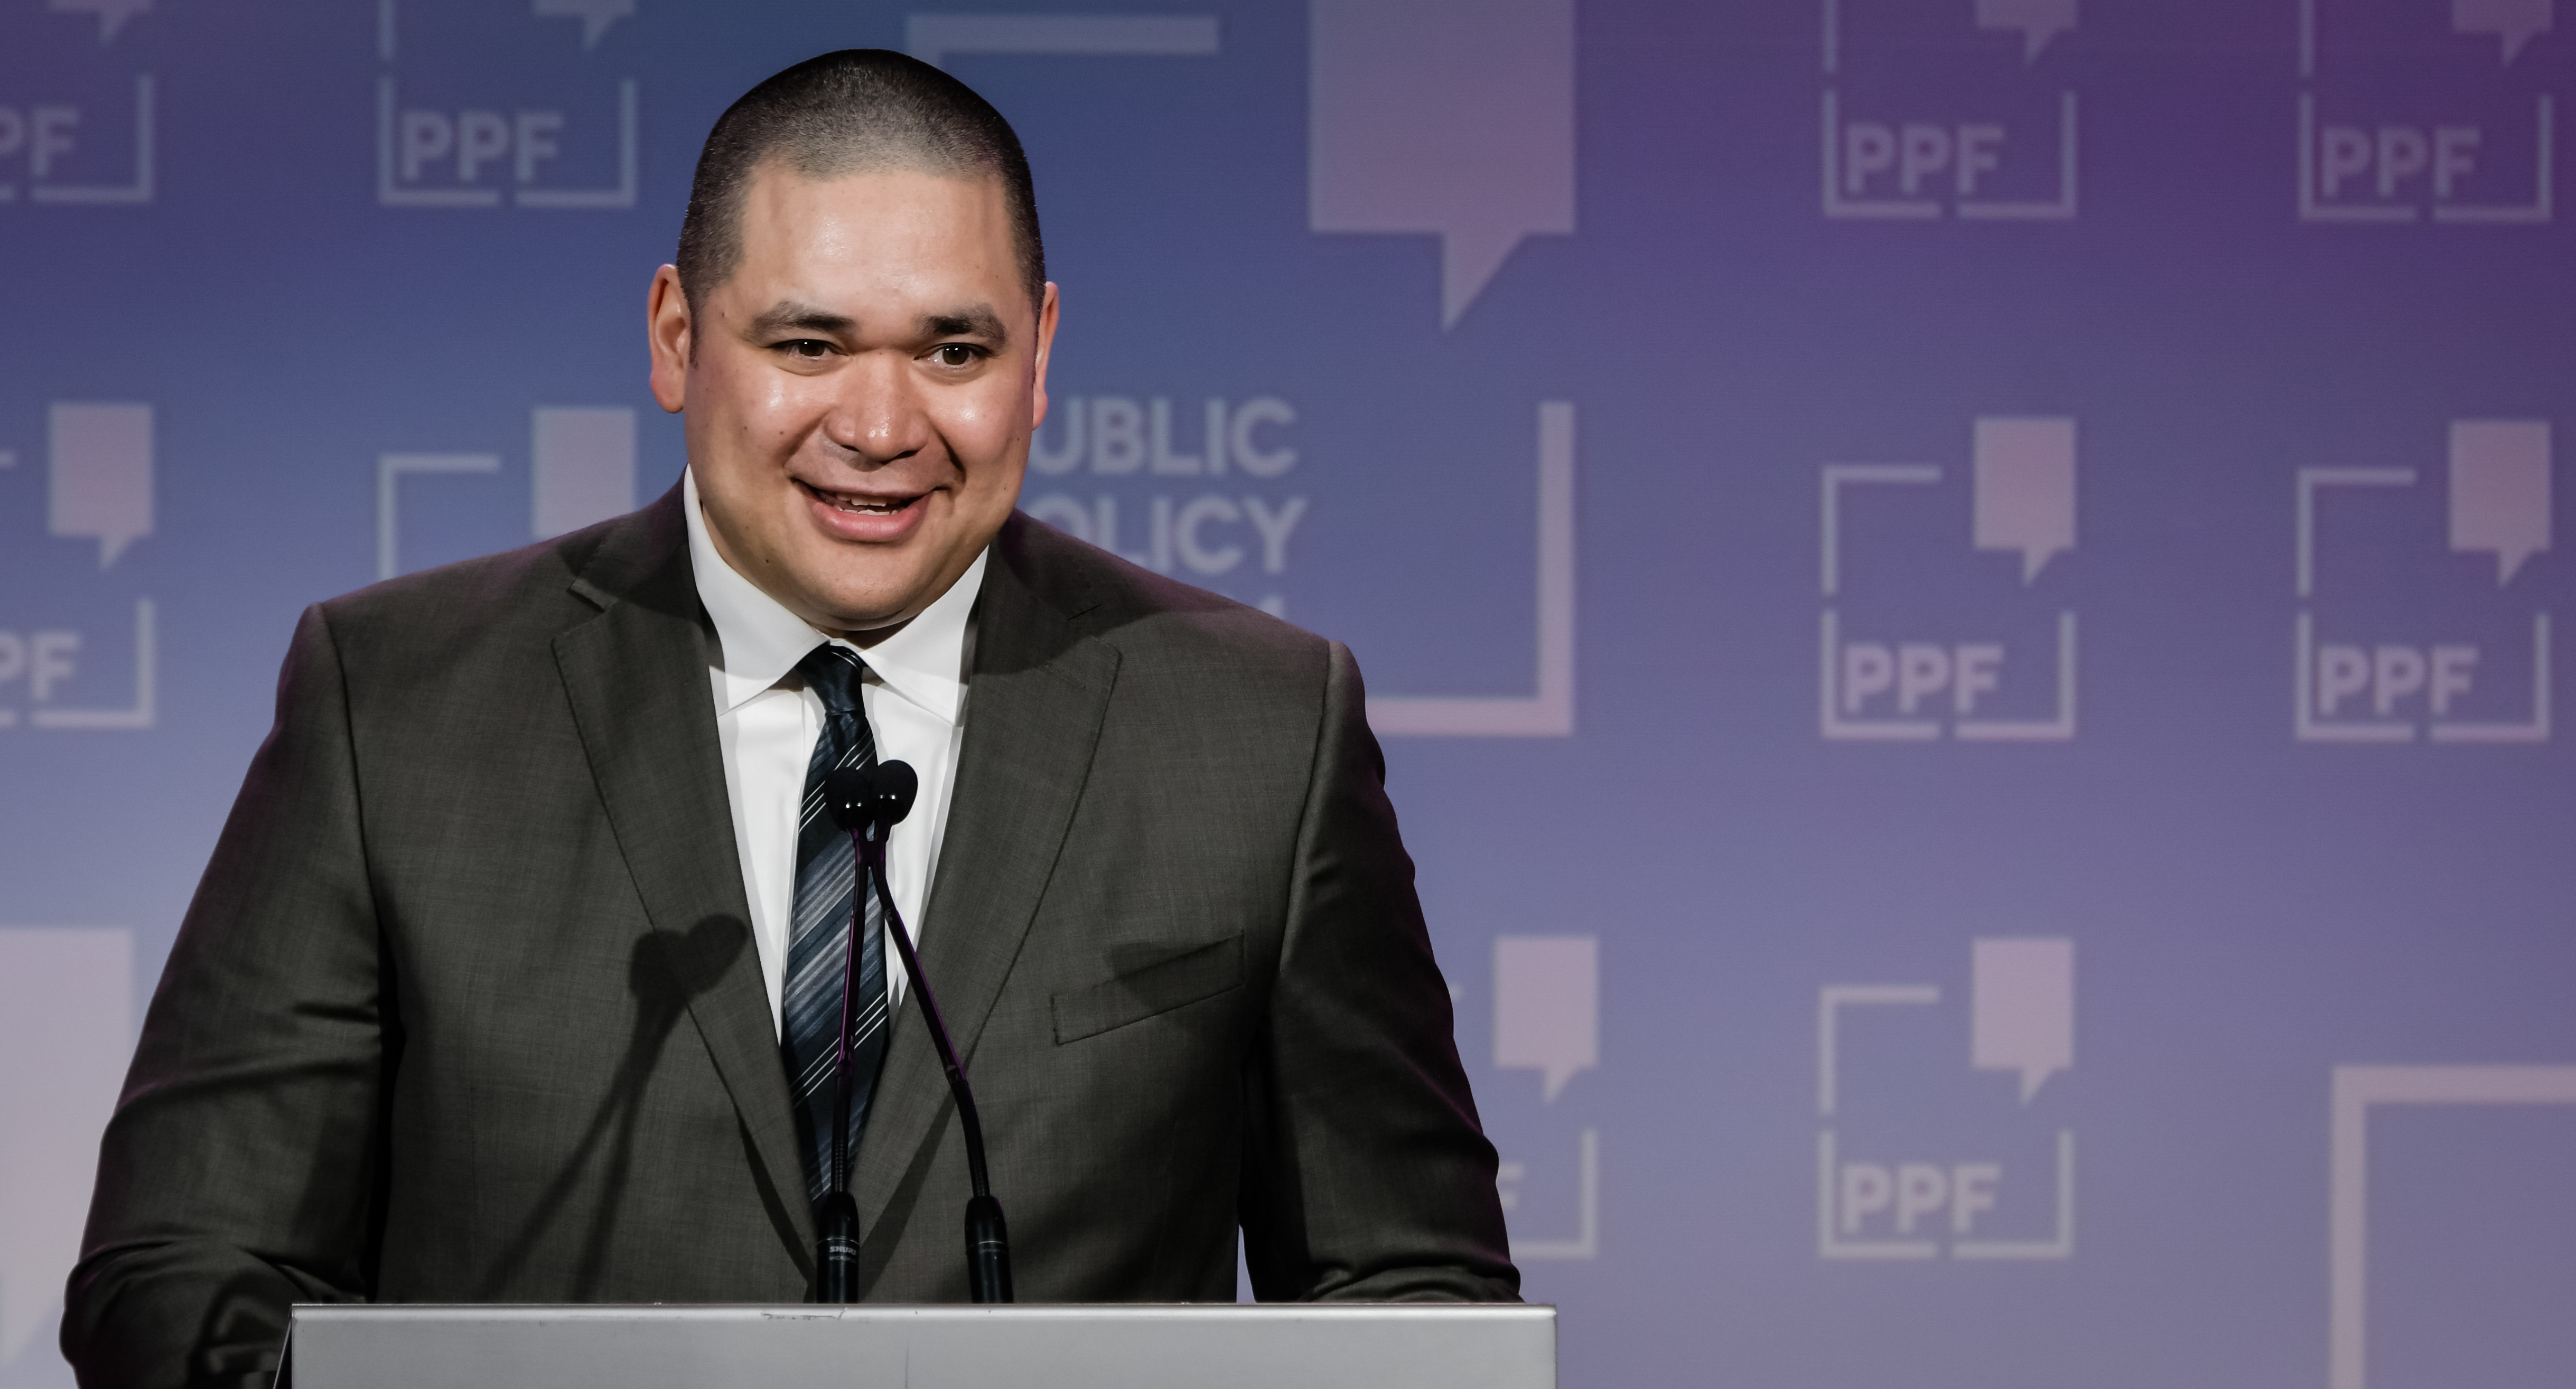 Lafontaine speaks at the 2017 Public Policy Forum Testimonial Dinner and Awards. He received the Emerging Leader Award. Photo courtesy of the Public Policy Forum